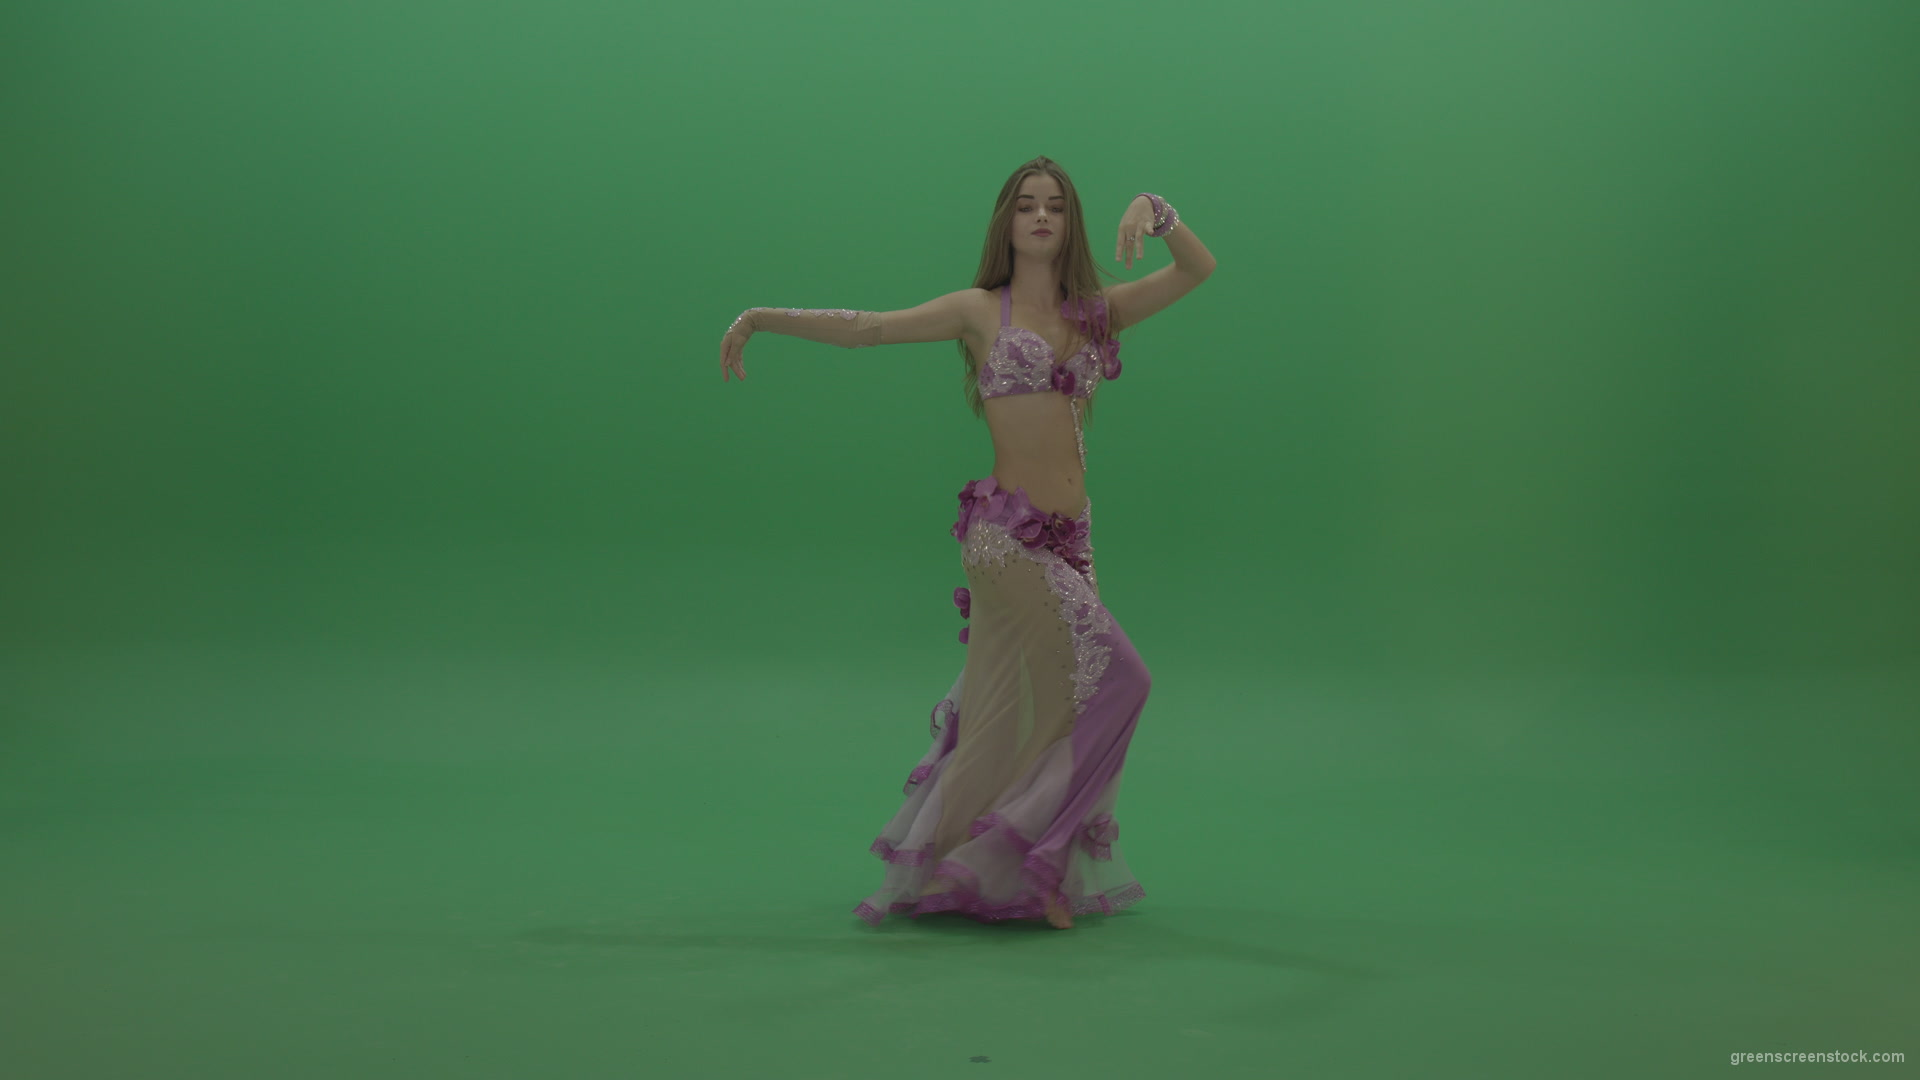 Beautiful-belly-dancer-display-amazing-dance-moves-over-chromakey-background_004 Green Screen Stock